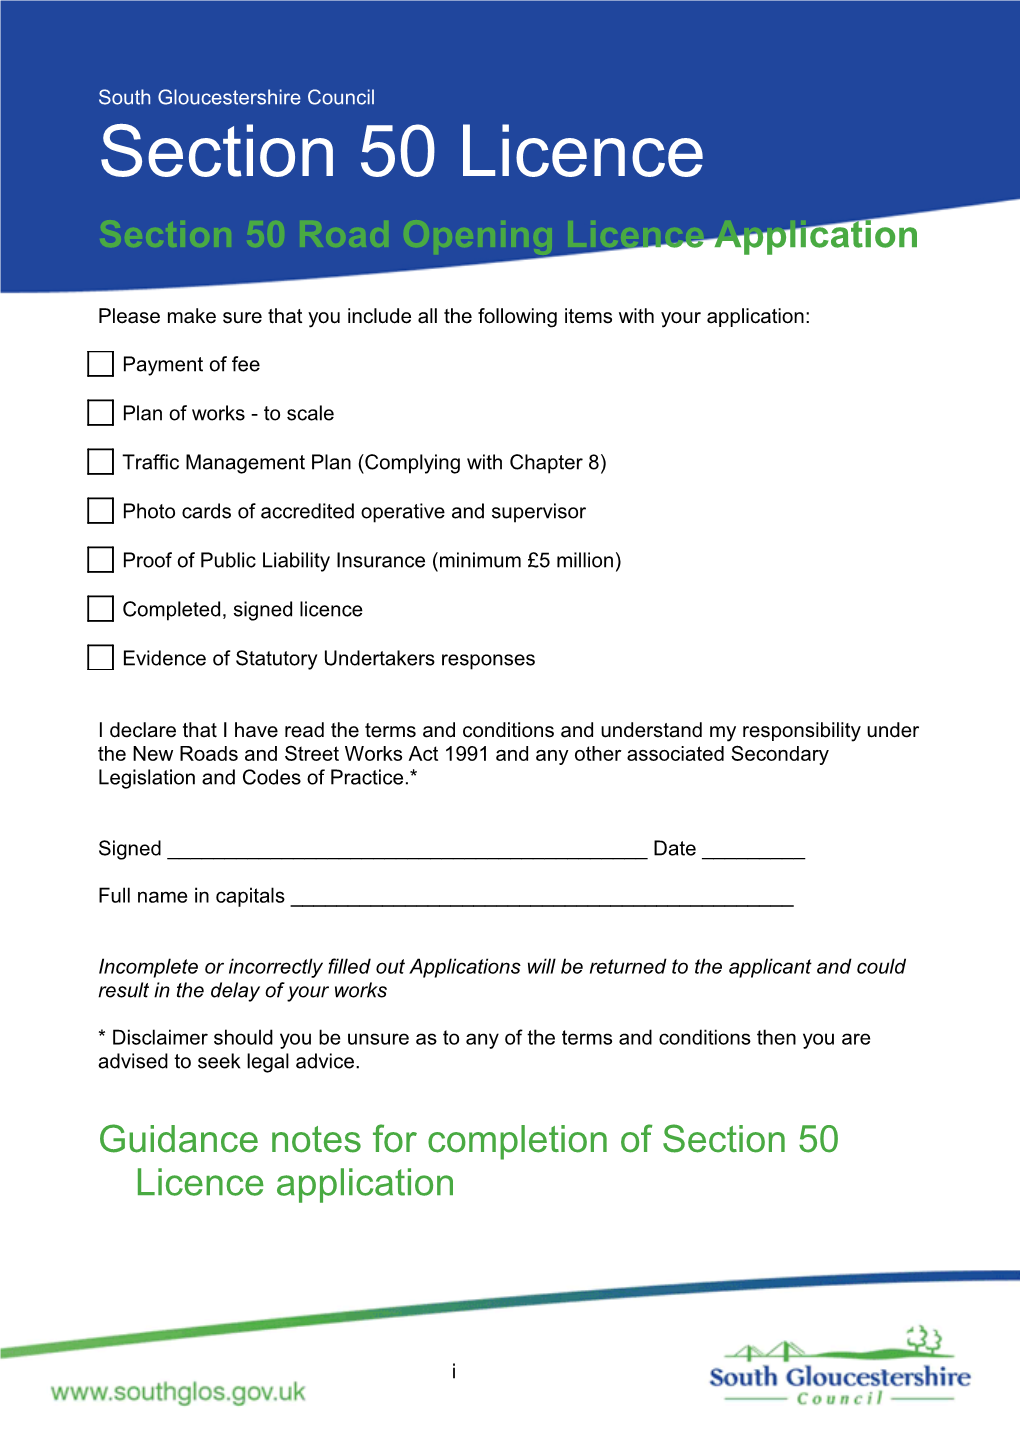 Section 50 Road Opening Licence Application